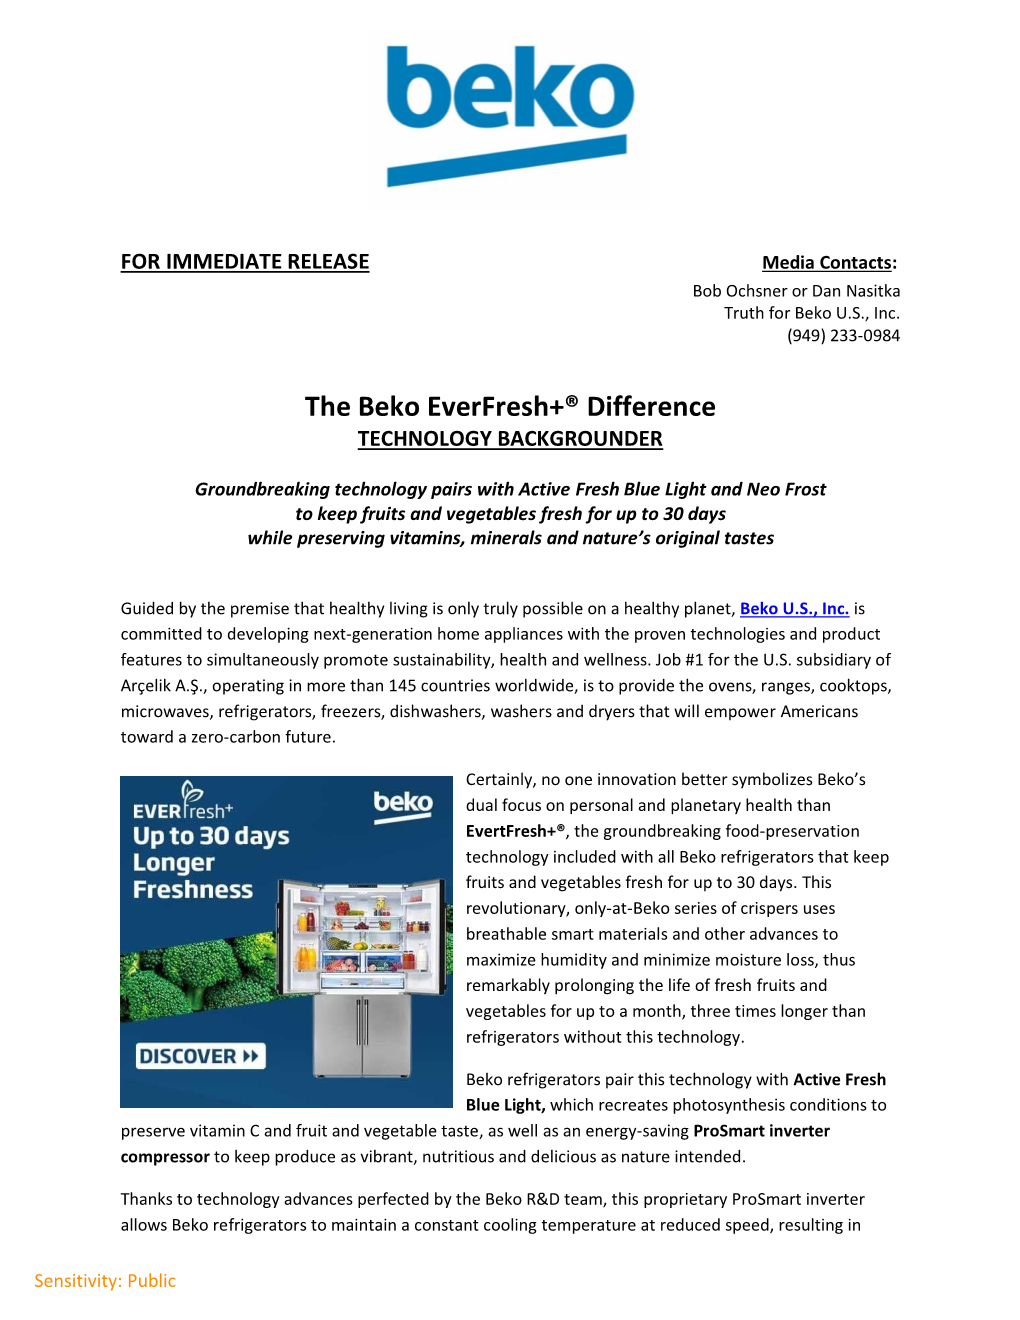 The Beko Everfresh+® Difference TECHNOLOGY BACKGROUNDER